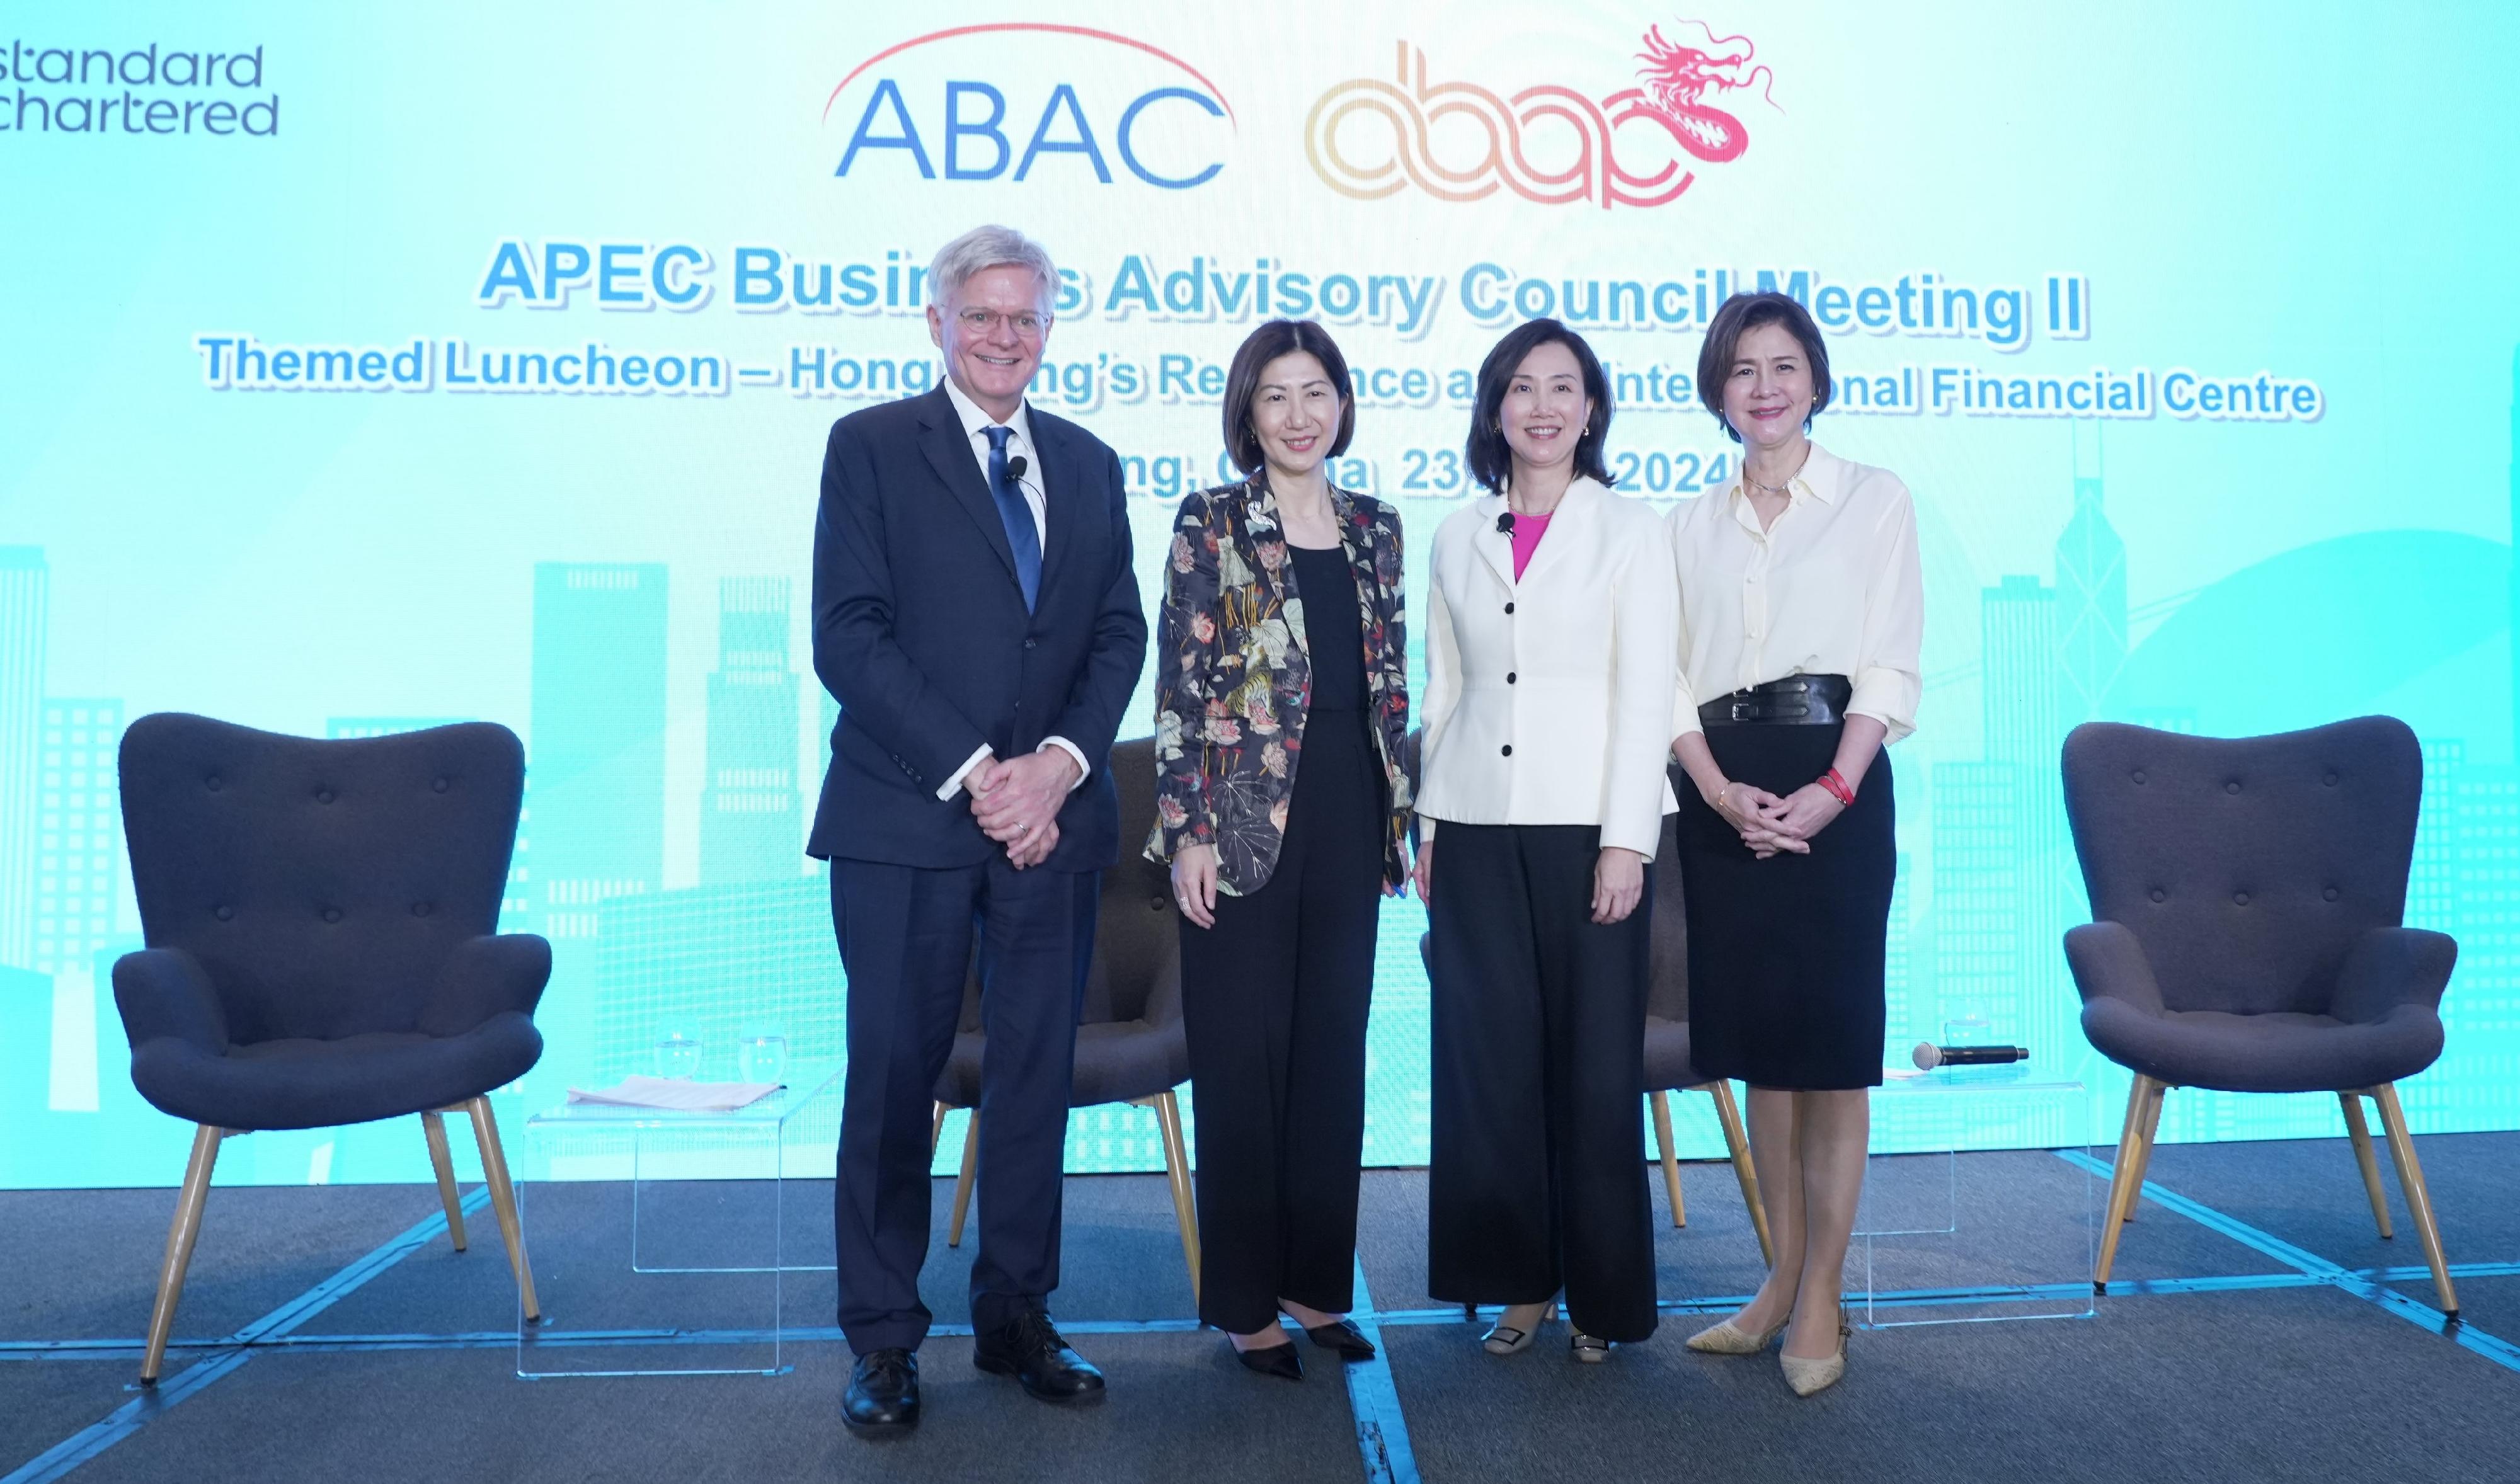 The second 2024 Asia-Pacific Economic Cooperation Business Advisory Council (ABAC) Meeting (the second Meeting) was held from April 22 to 25 in Hong Kong. During the second Meeting, Hong Kong, China's representative to ABAC Ms Mary Huen joined a panel discussion on Hong Kong's Resilience as an International Financial Centre at a themed luncheon sponsored by Standard Chartered Bank (Hong Kong) Limited on April 23. Photo shows Ms Huen (second right) with other panellists. 